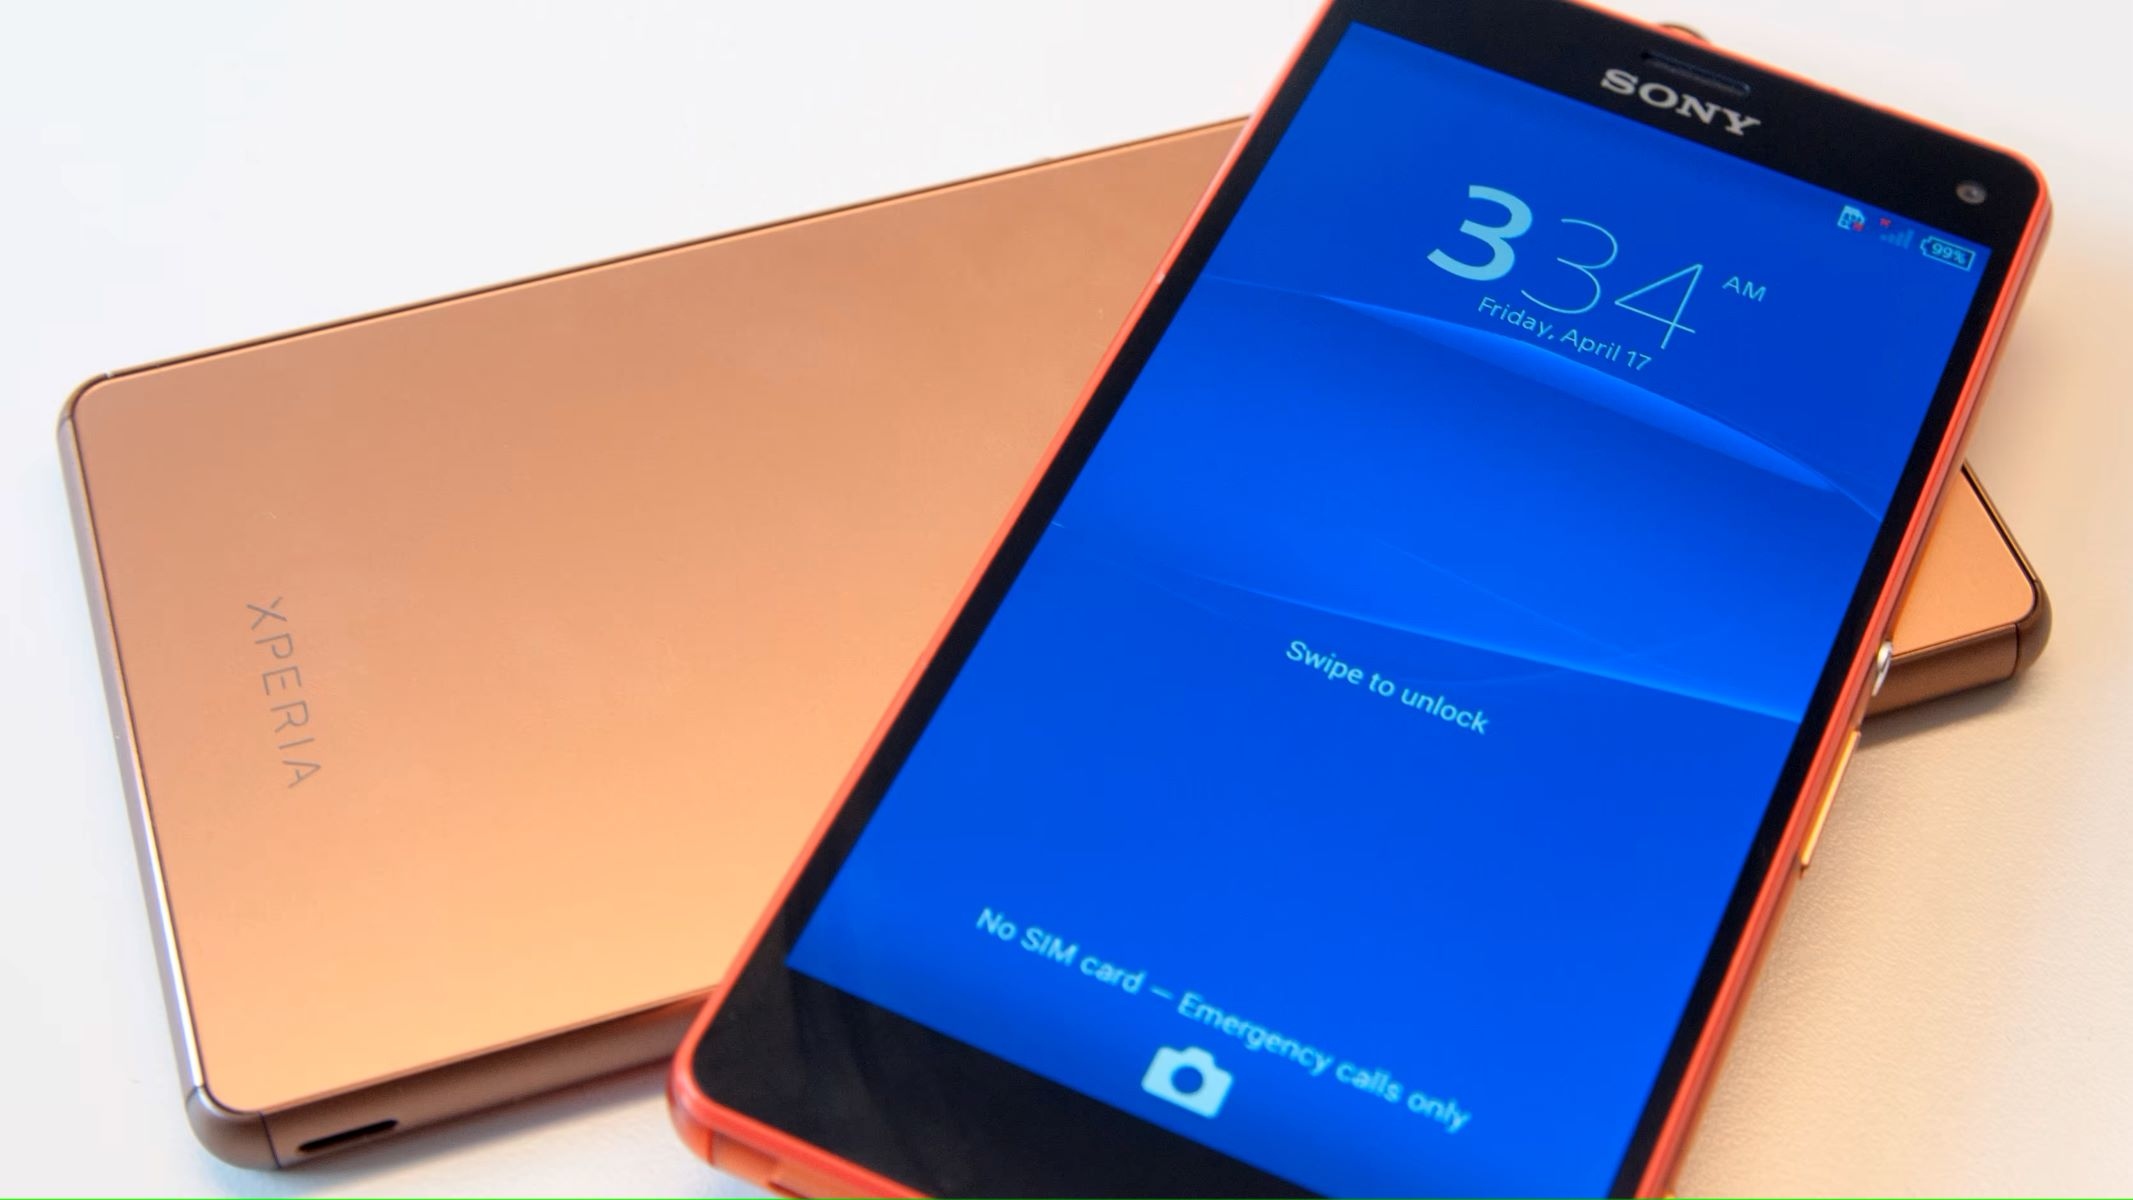 Xperia Z3 Compact Rooting Guide: Advanced Customization